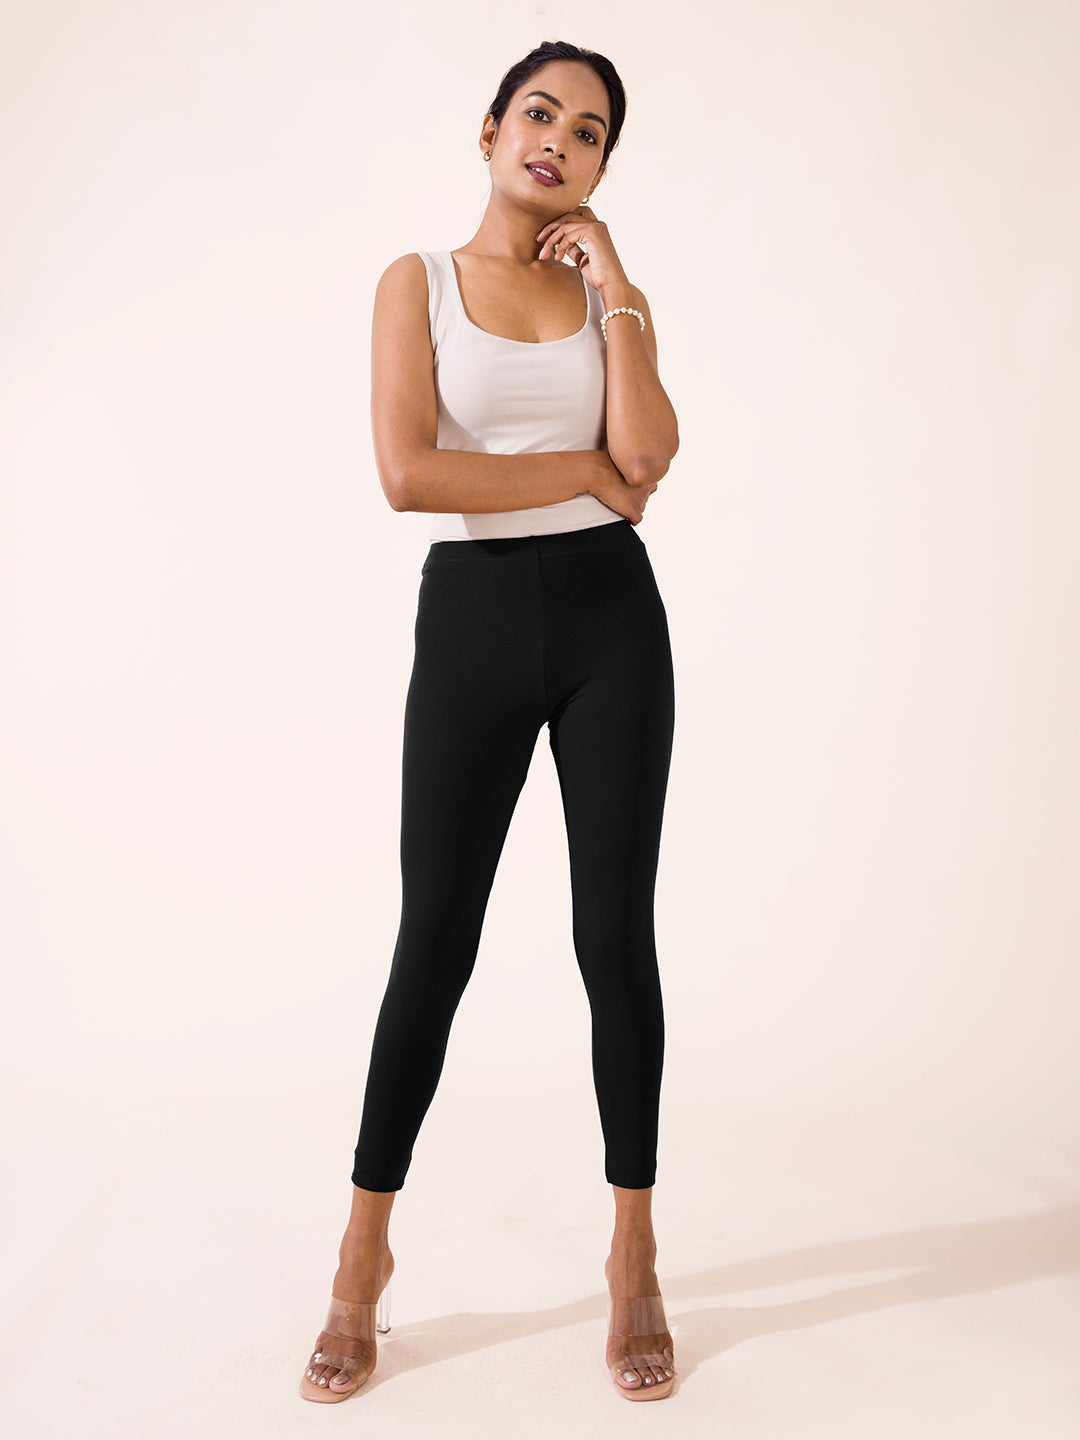 Stronger, Flexible, and Reliable Leggings Manufacturer USA | Seam Apparel